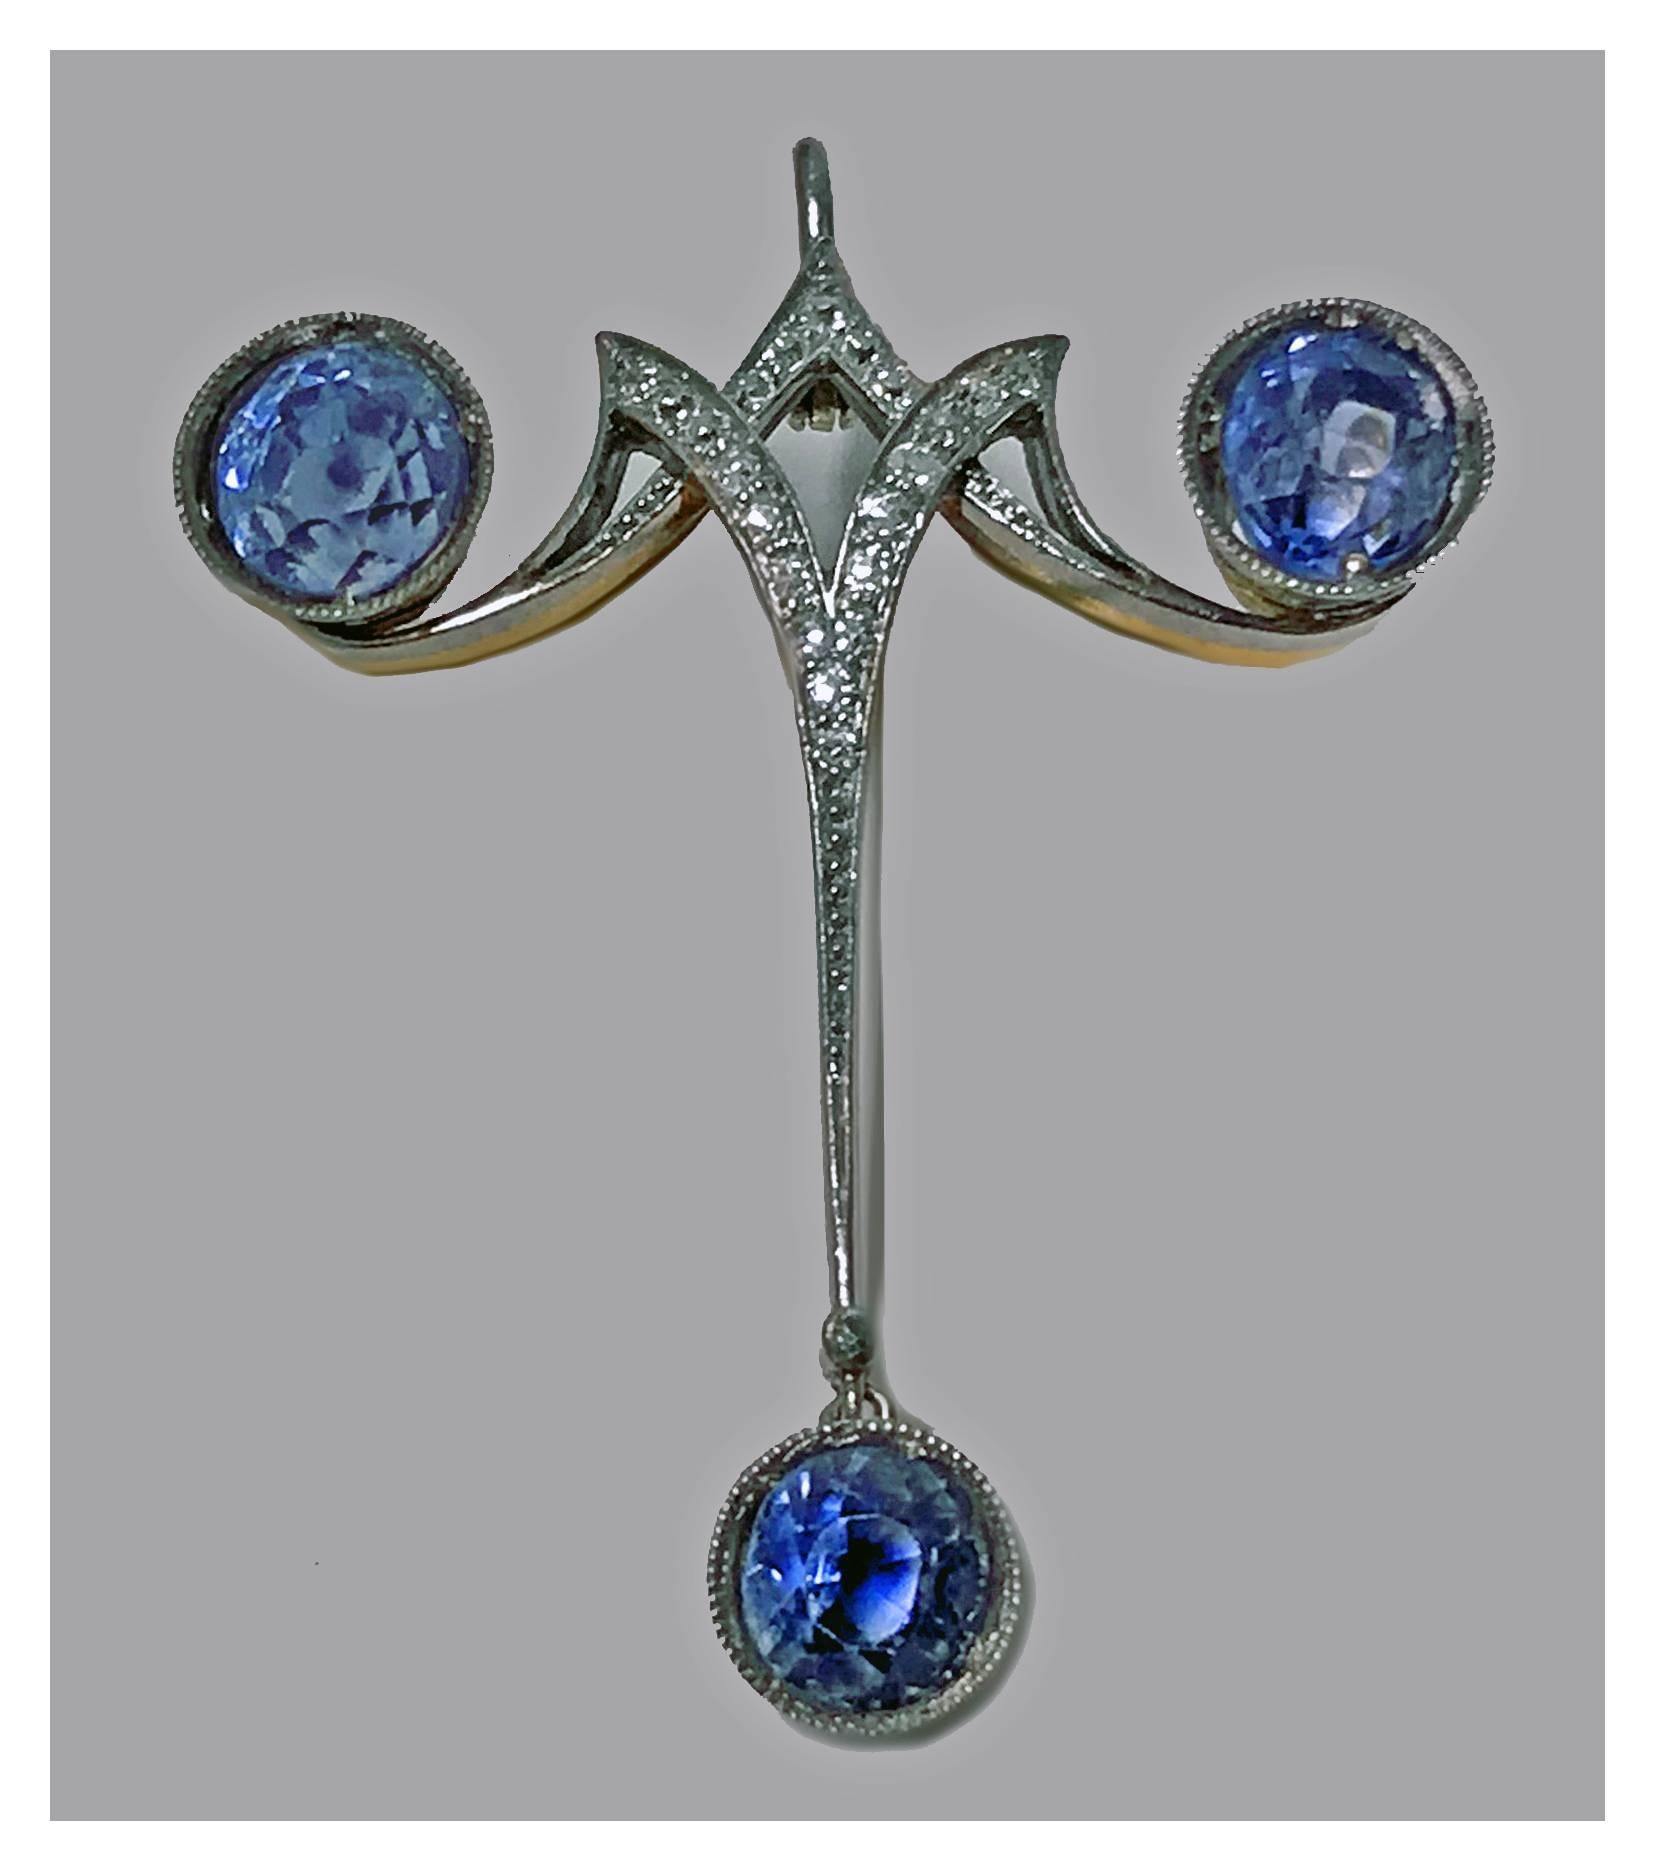 Edwardian Platinum and 18K Sapphire and Diamond Pendant Brooch, C.1910. The pendant brooch of a `comet’ off twist style shape milligrain set with three round faceted medium violetish Blue Sapphires, approximately 3.80 cts, total sapphire weight, SI